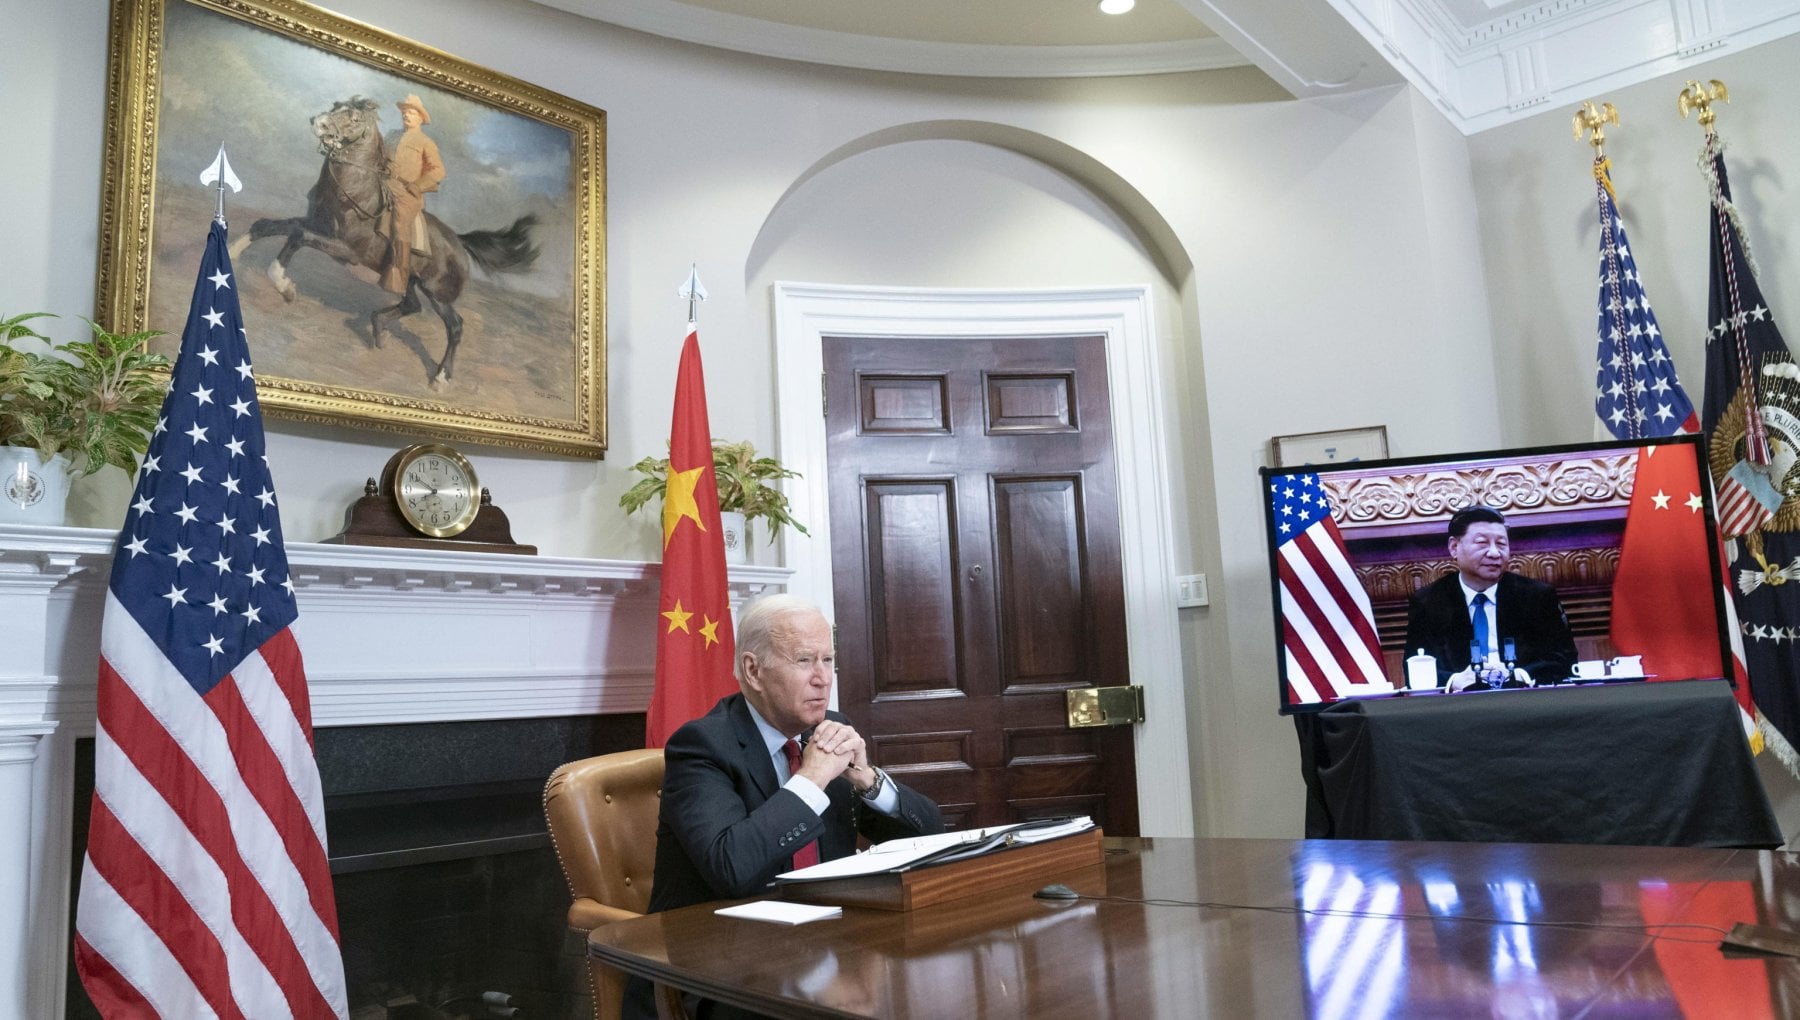 The United States and China, the online confrontation between Biden and Xi began: “Competition does not descend into conflict.”  “improve communication”